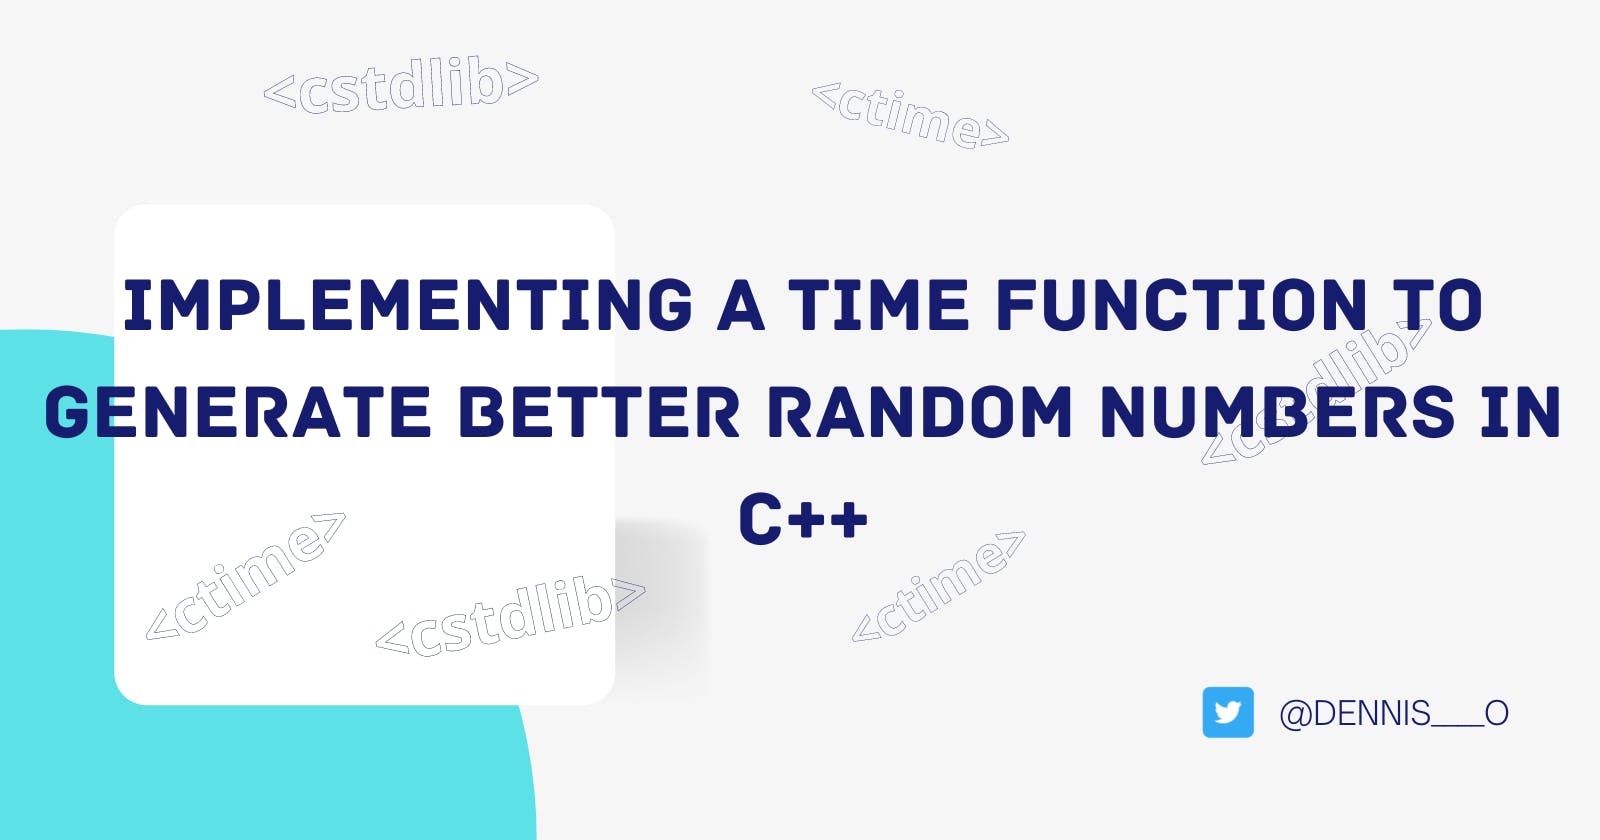 Implementing a time function to generate better random numbers in C++